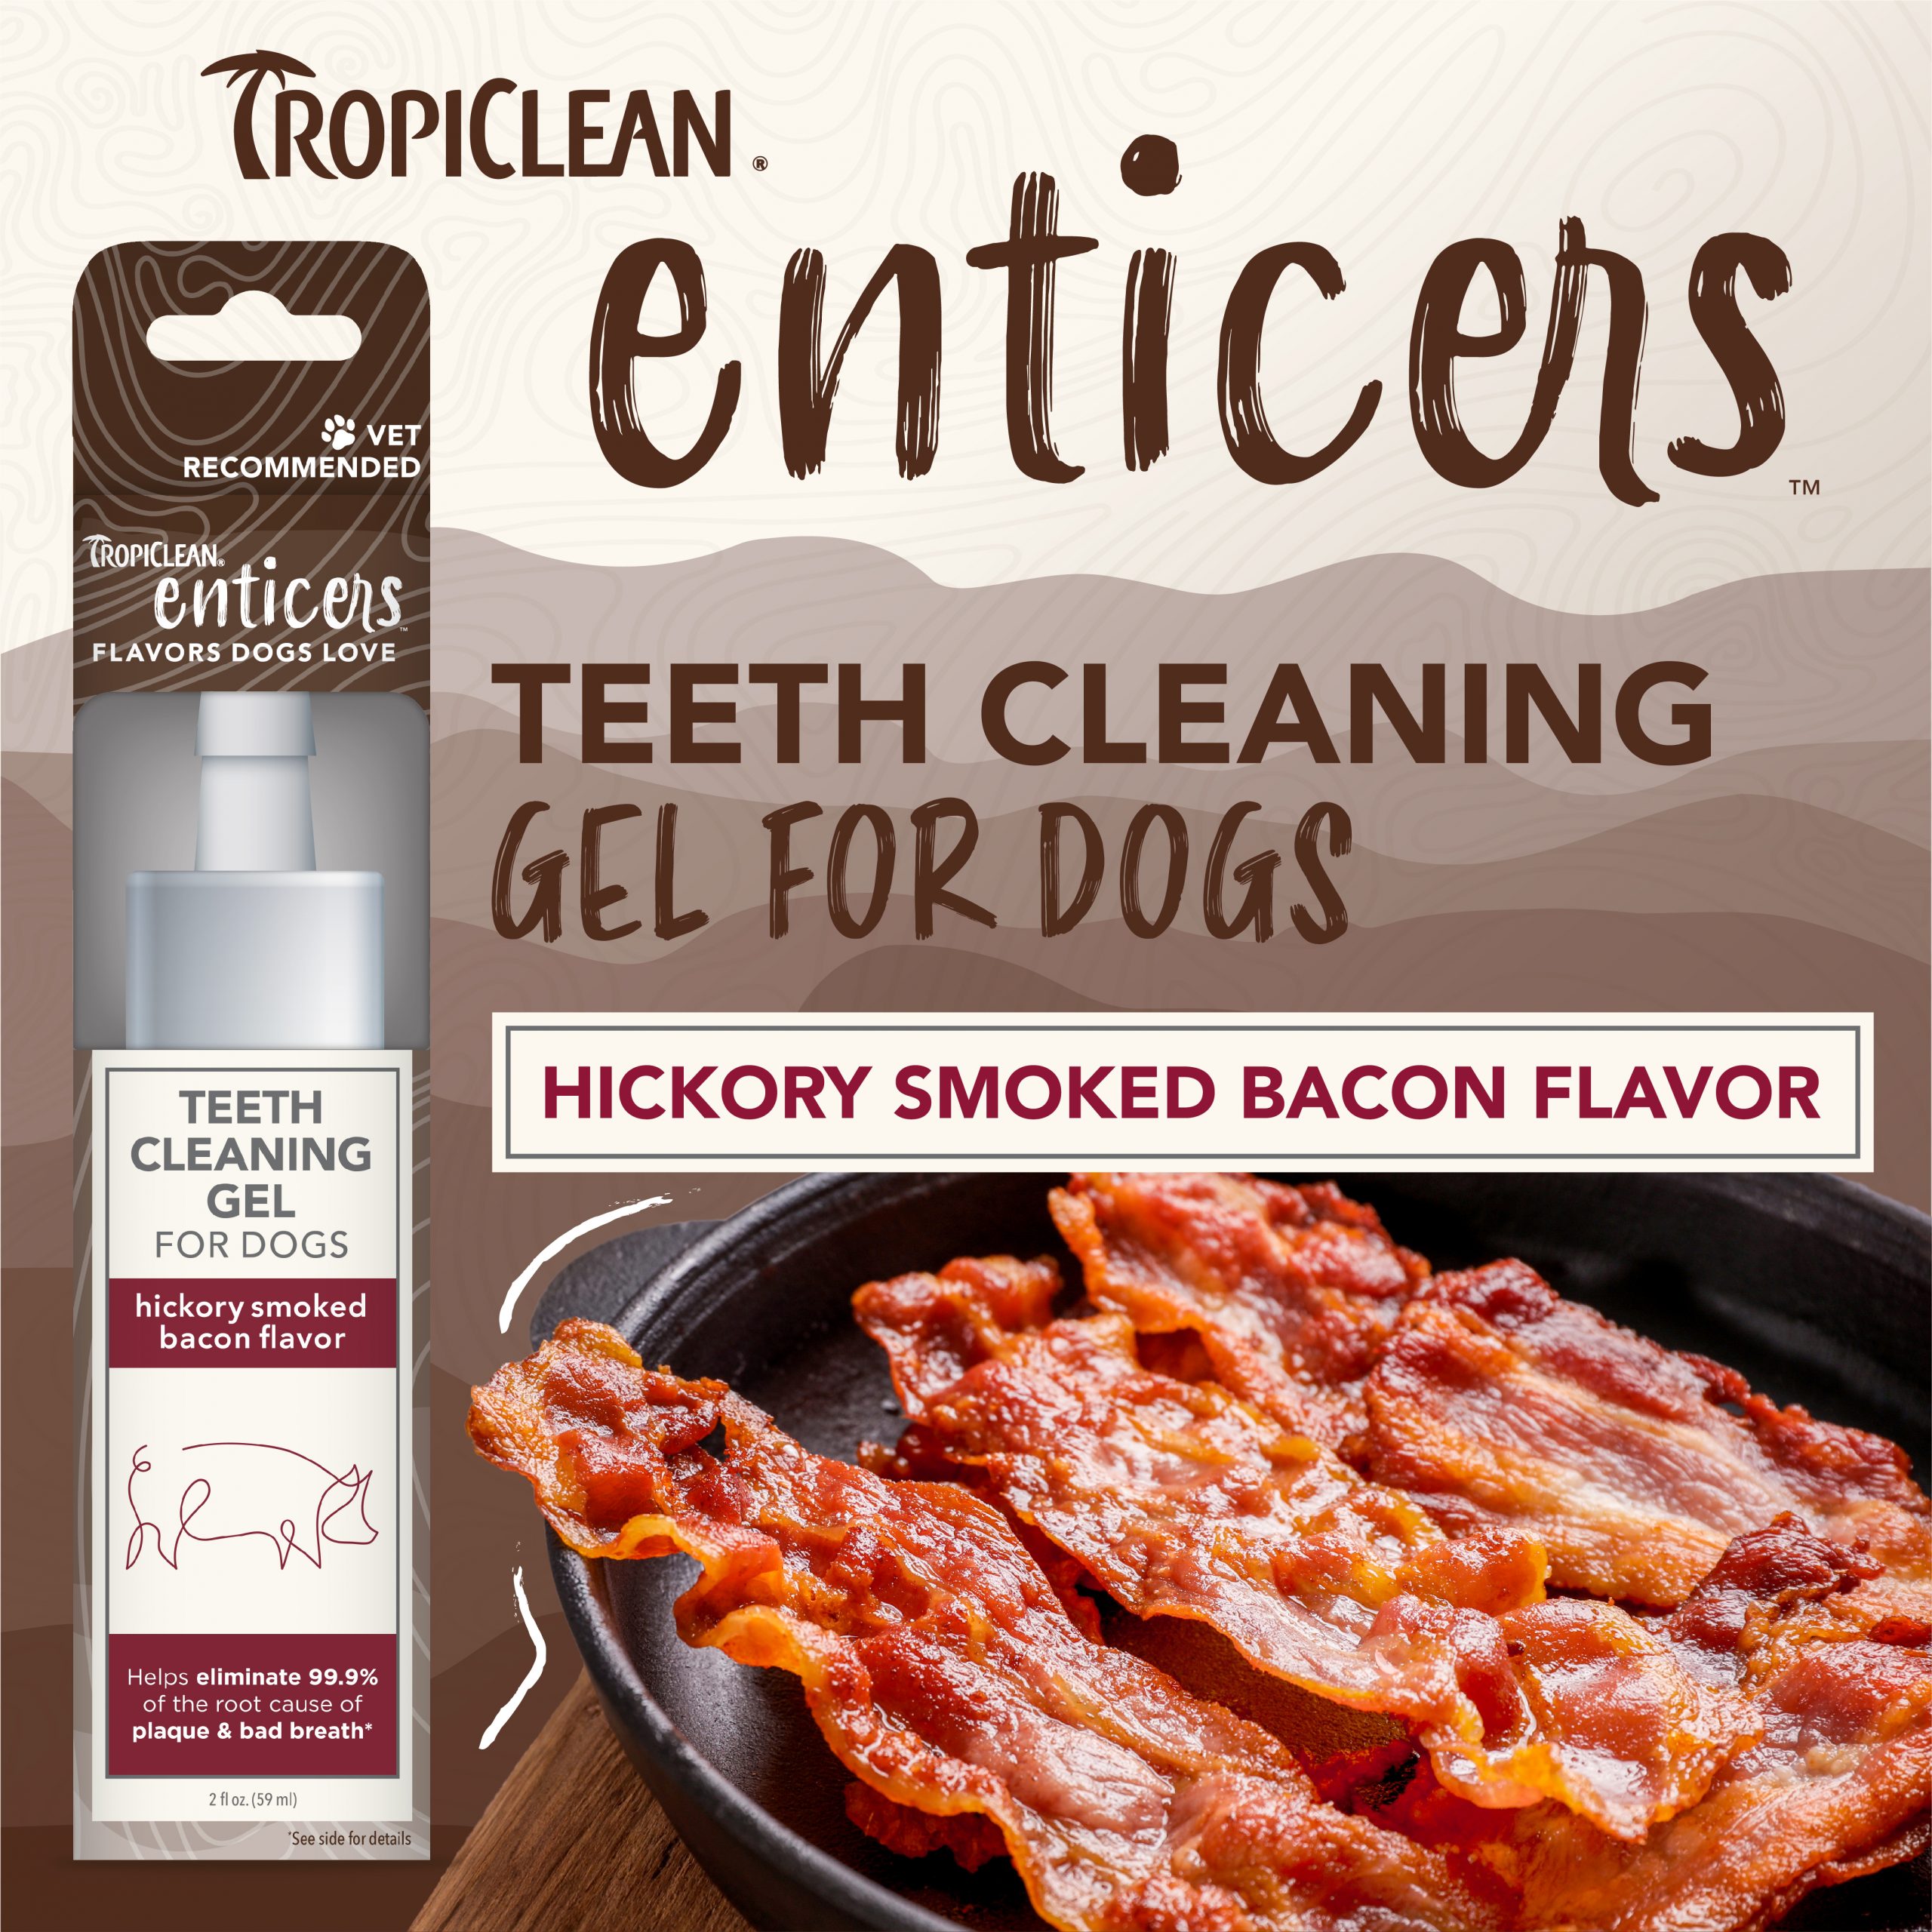 Teeth Cleaning Gel for Dogs – Hickory Smoked Bacon Flavor